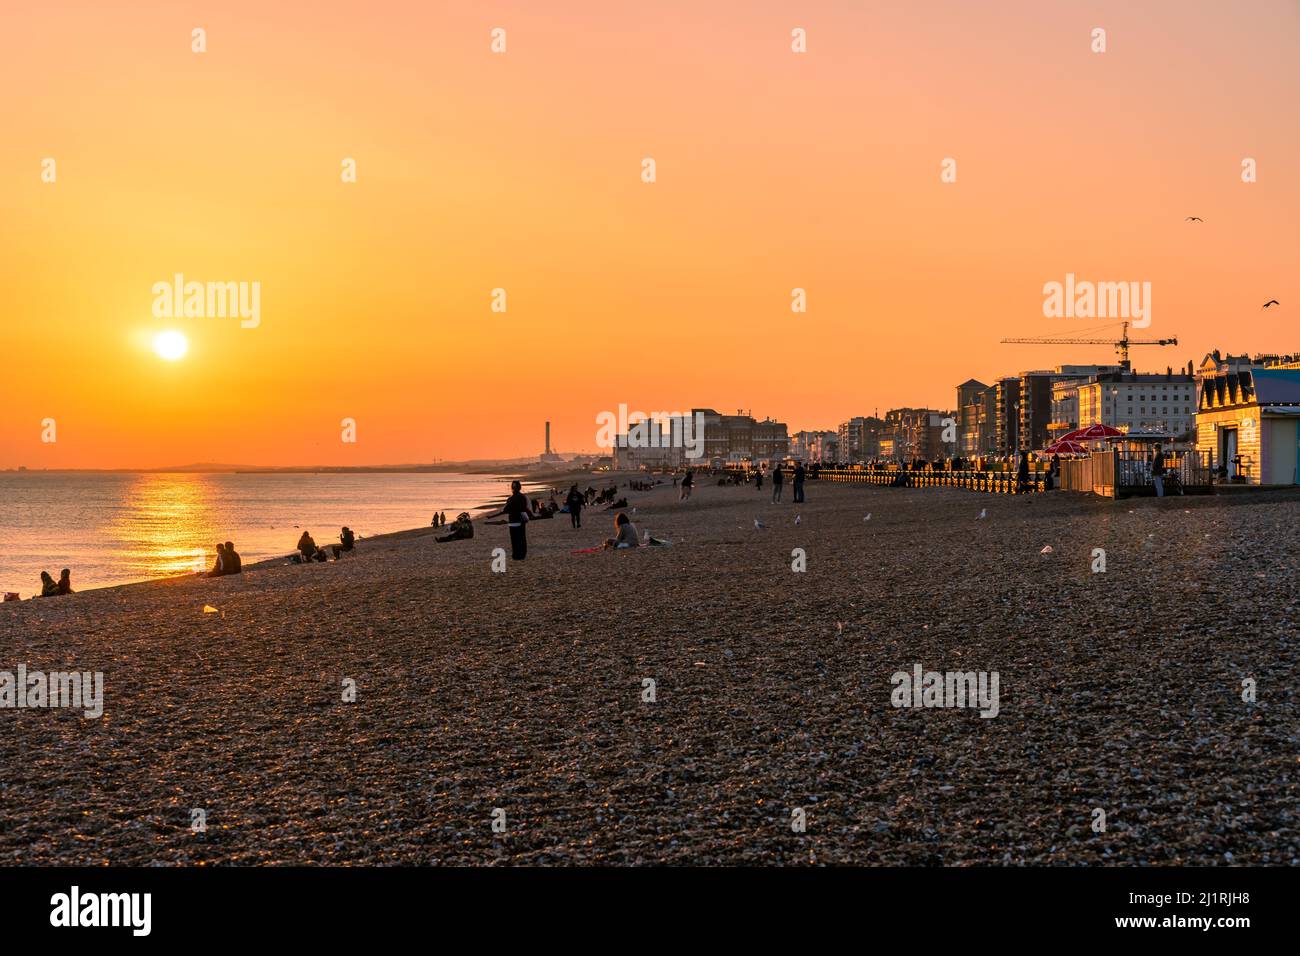 Hove, East Sussex, England. 27 March 2022. The beautiful sunset on Sunday evening along the seafront as Hove glows in the setting sun on an early spring evening on the first day of British summer time .©Sarah Mott / Alamy Live News Stock Photo